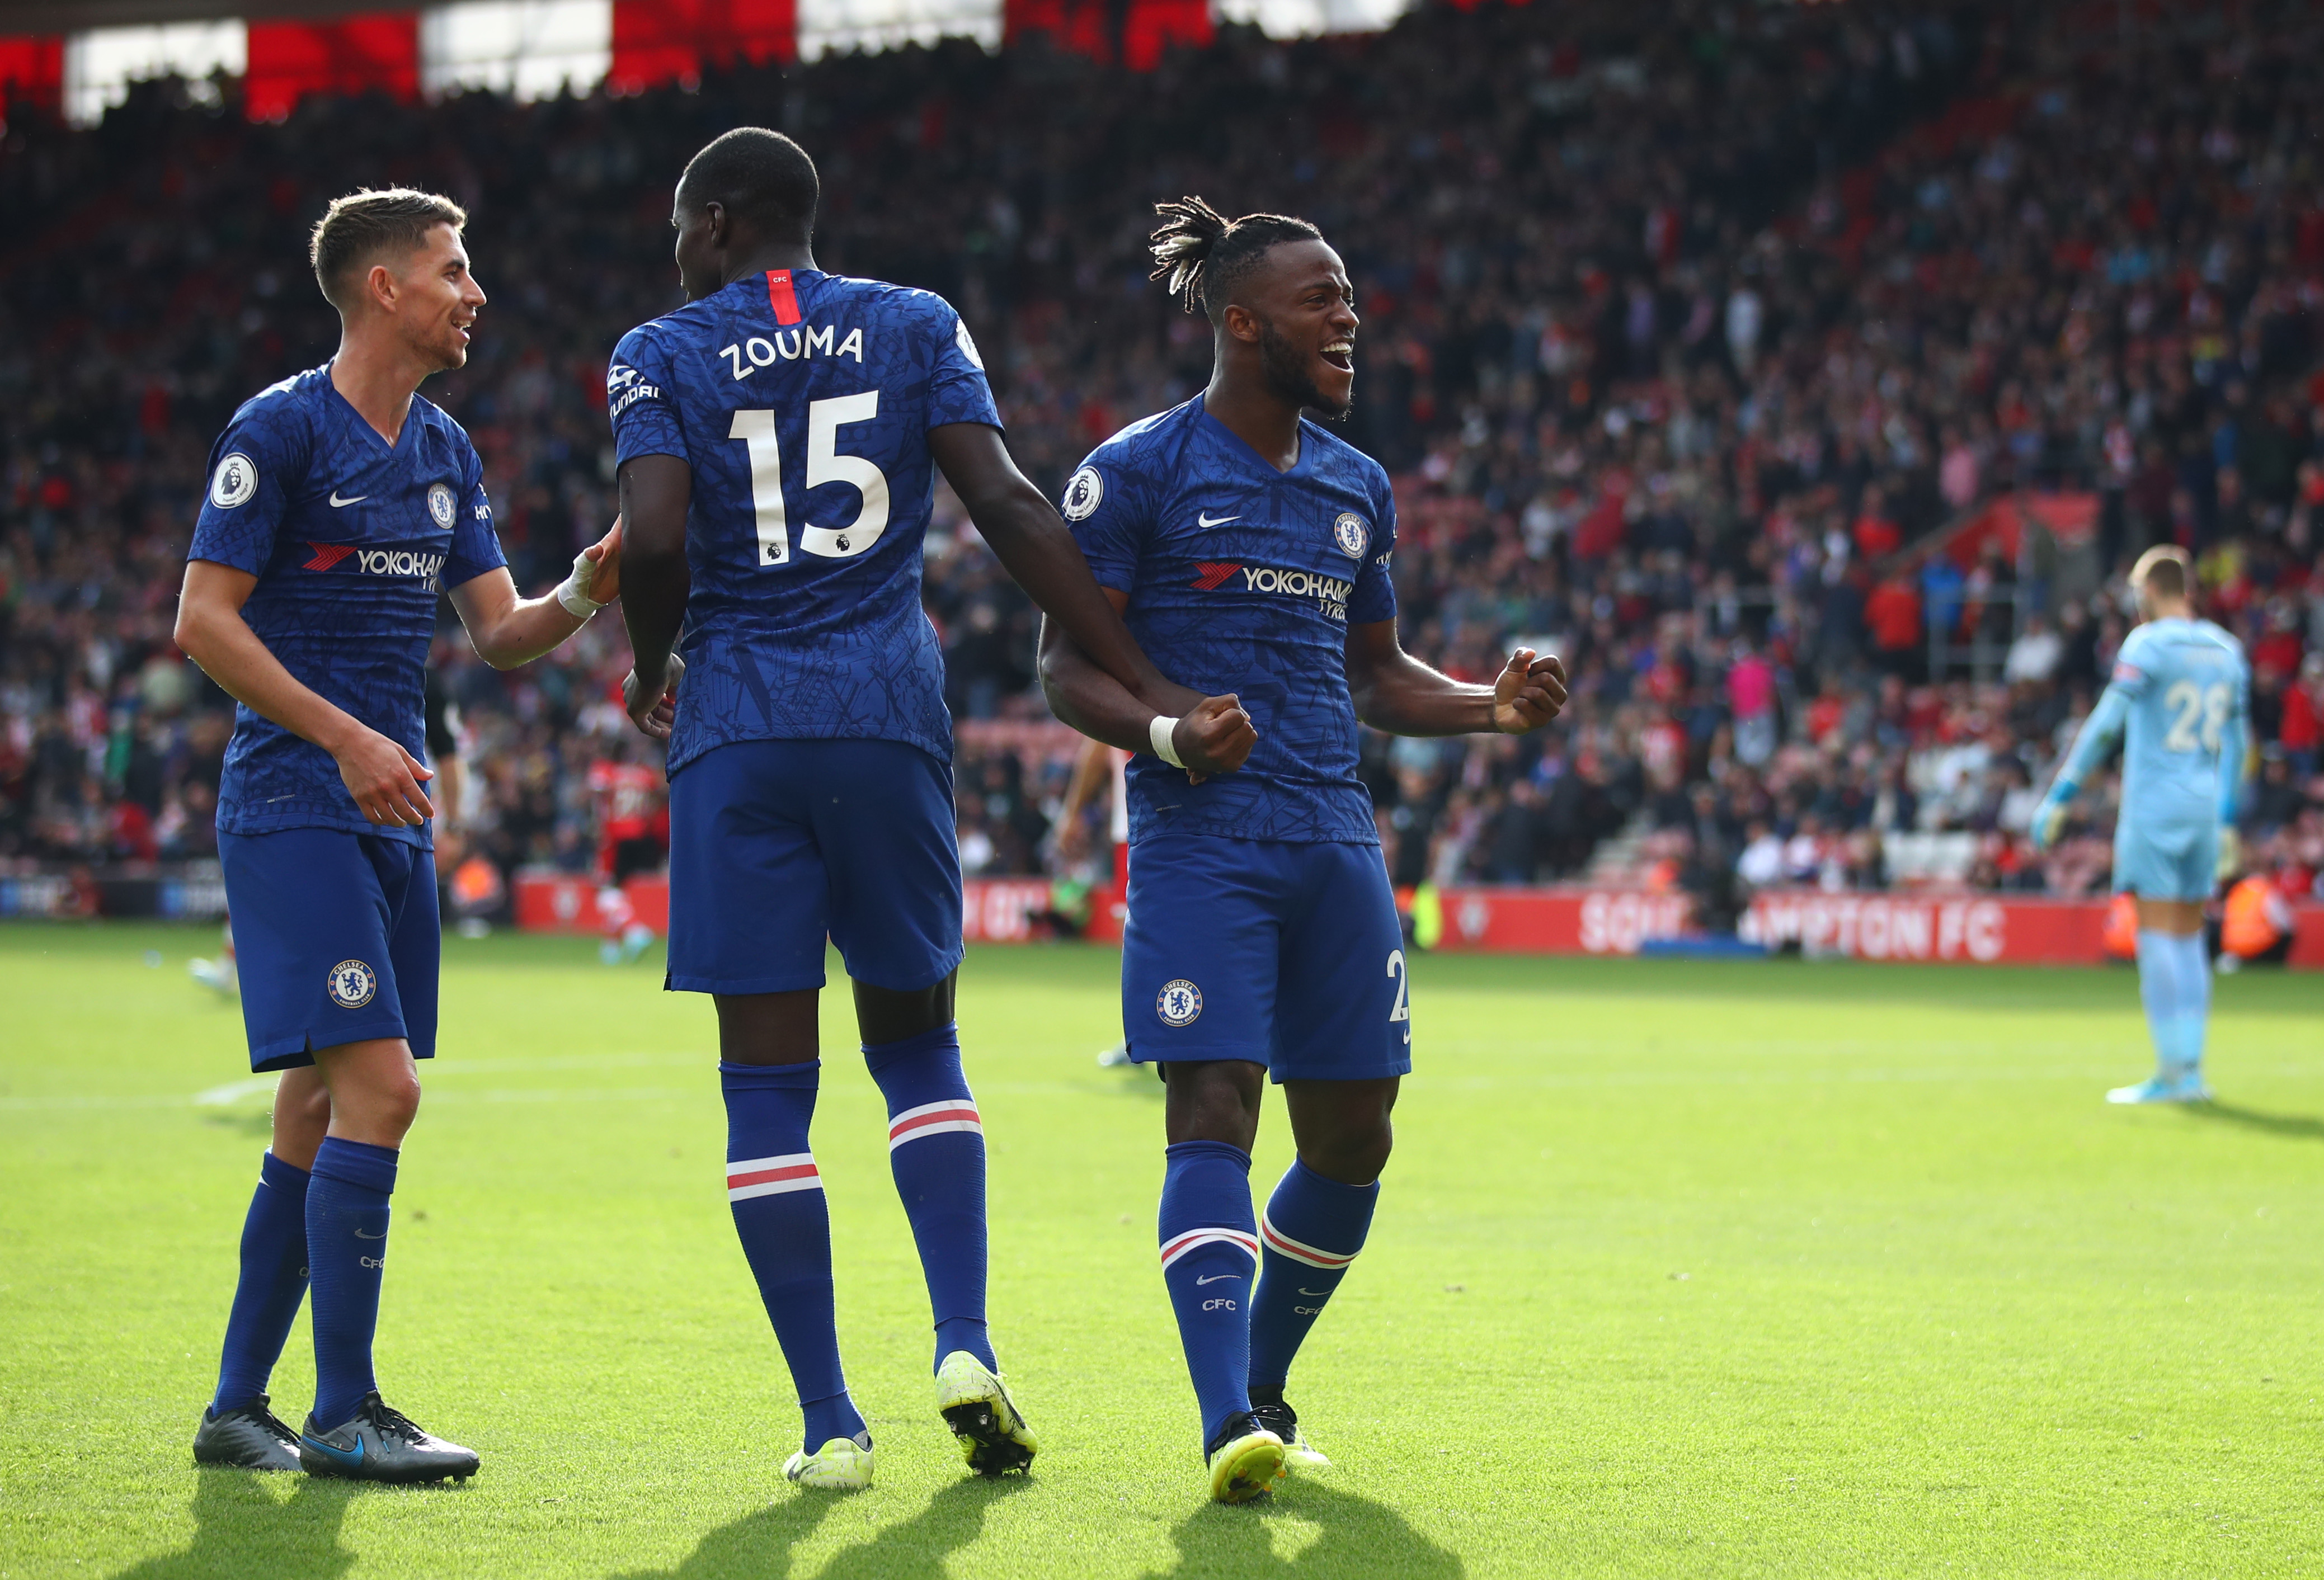 SOUTHAMPTON, ENGLAND - OCTOBER 06: Michy Batshuayi of Chelsea celebrates with teammates Kurt Zouma and Jorginho of Chelsea after scoring his teams fourth goal the Premier League match between Southampton FC and Chelsea FC at St Mary's Stadium on October 06, 2019 in Southampton, United Kingdom. (Photo by Julian Finney/Getty Images)